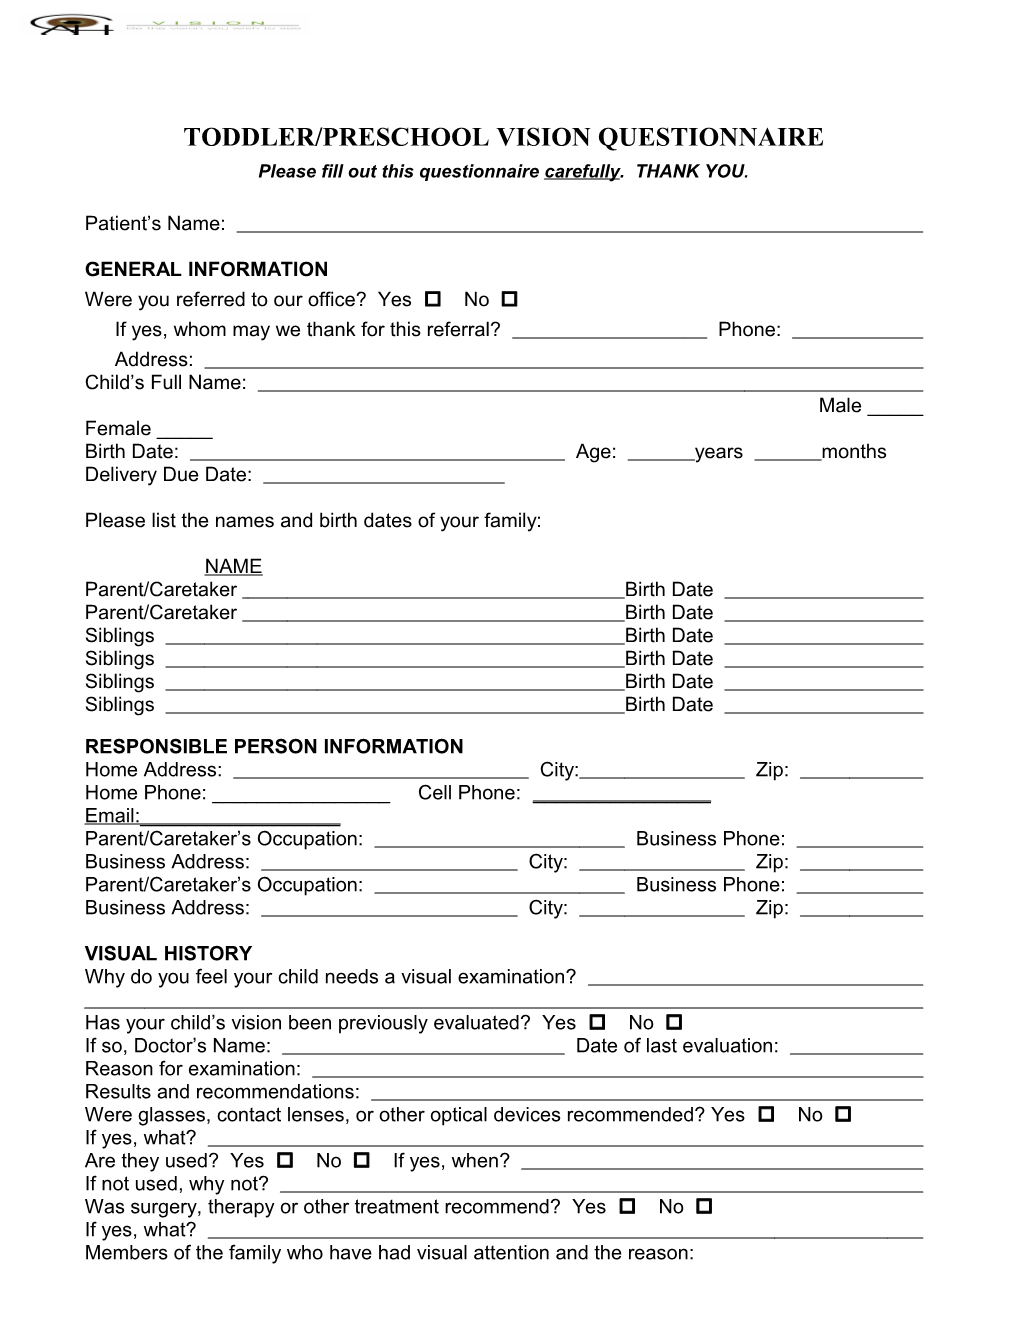 Please Fill out This Questionnaire Carefully. THANK YOU